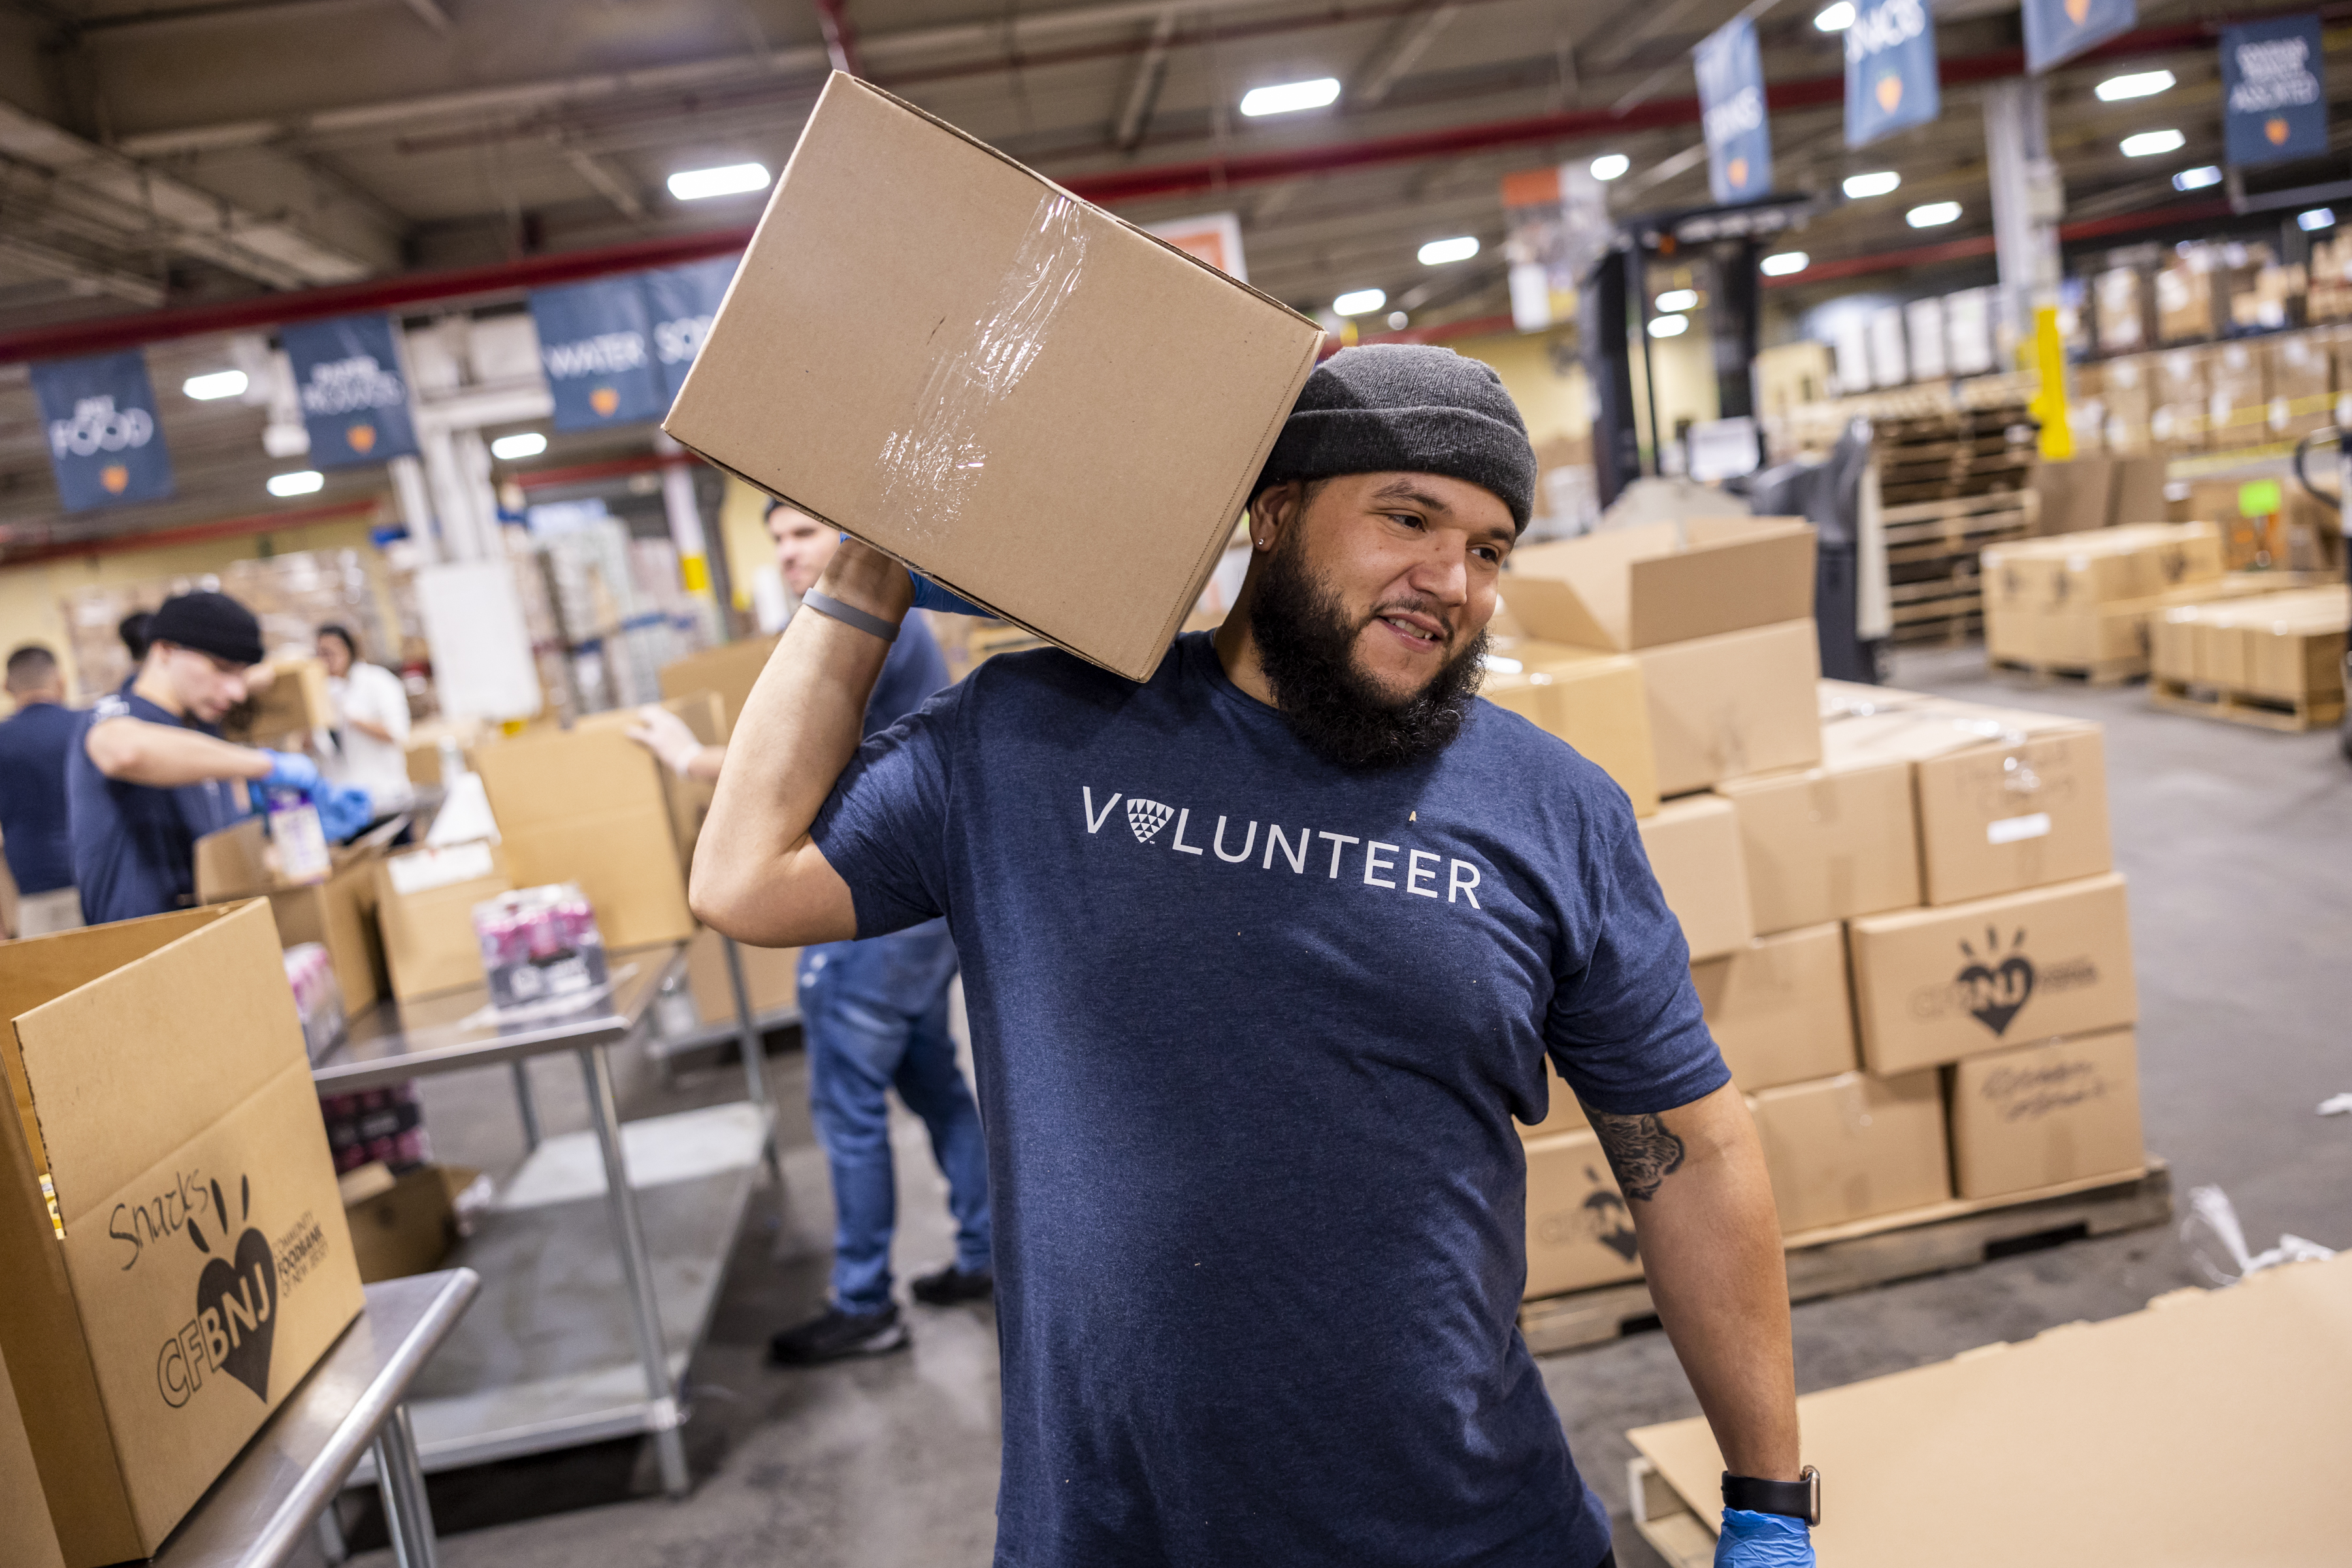 Man in Volunteer shirt living a box at a Foundation for Good event